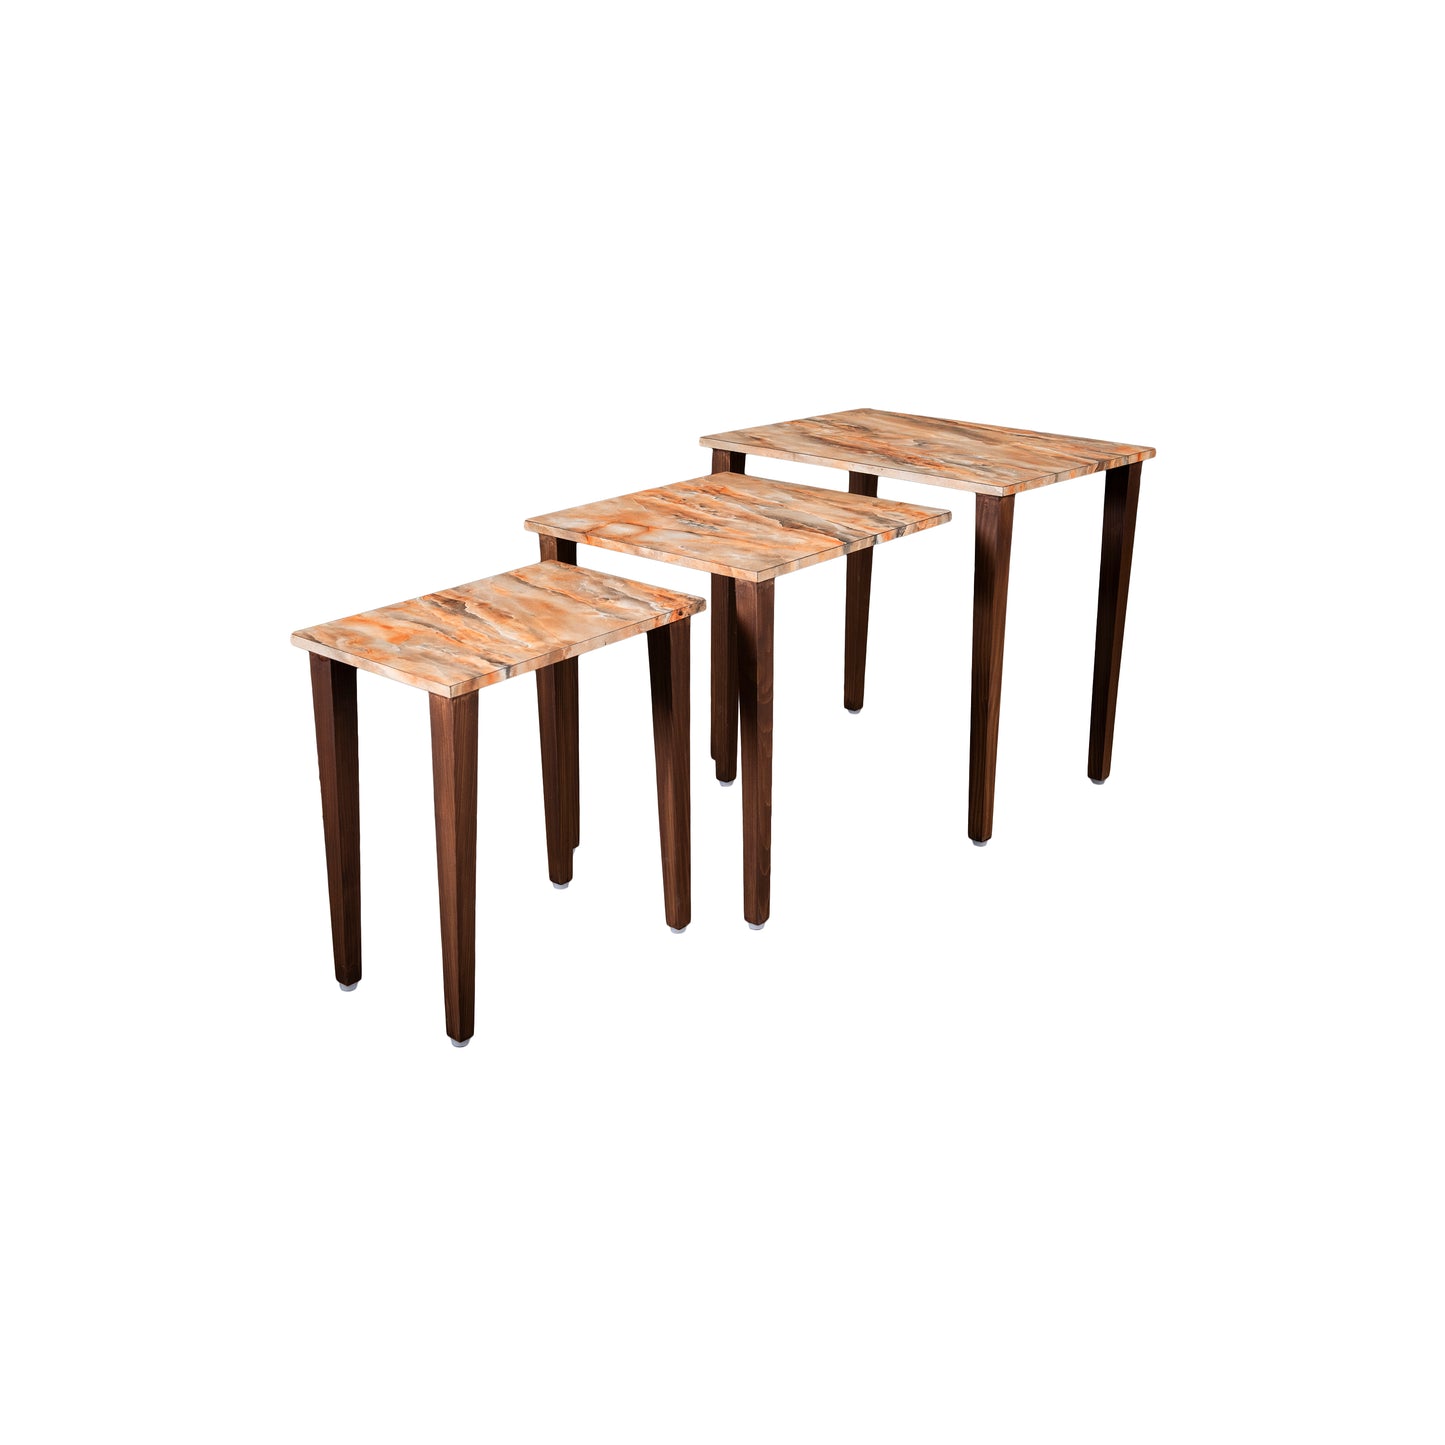 A Tiny Mistake Mountain Wooden Rectangle Nesting Tables (Set of 3), Living Room Decor